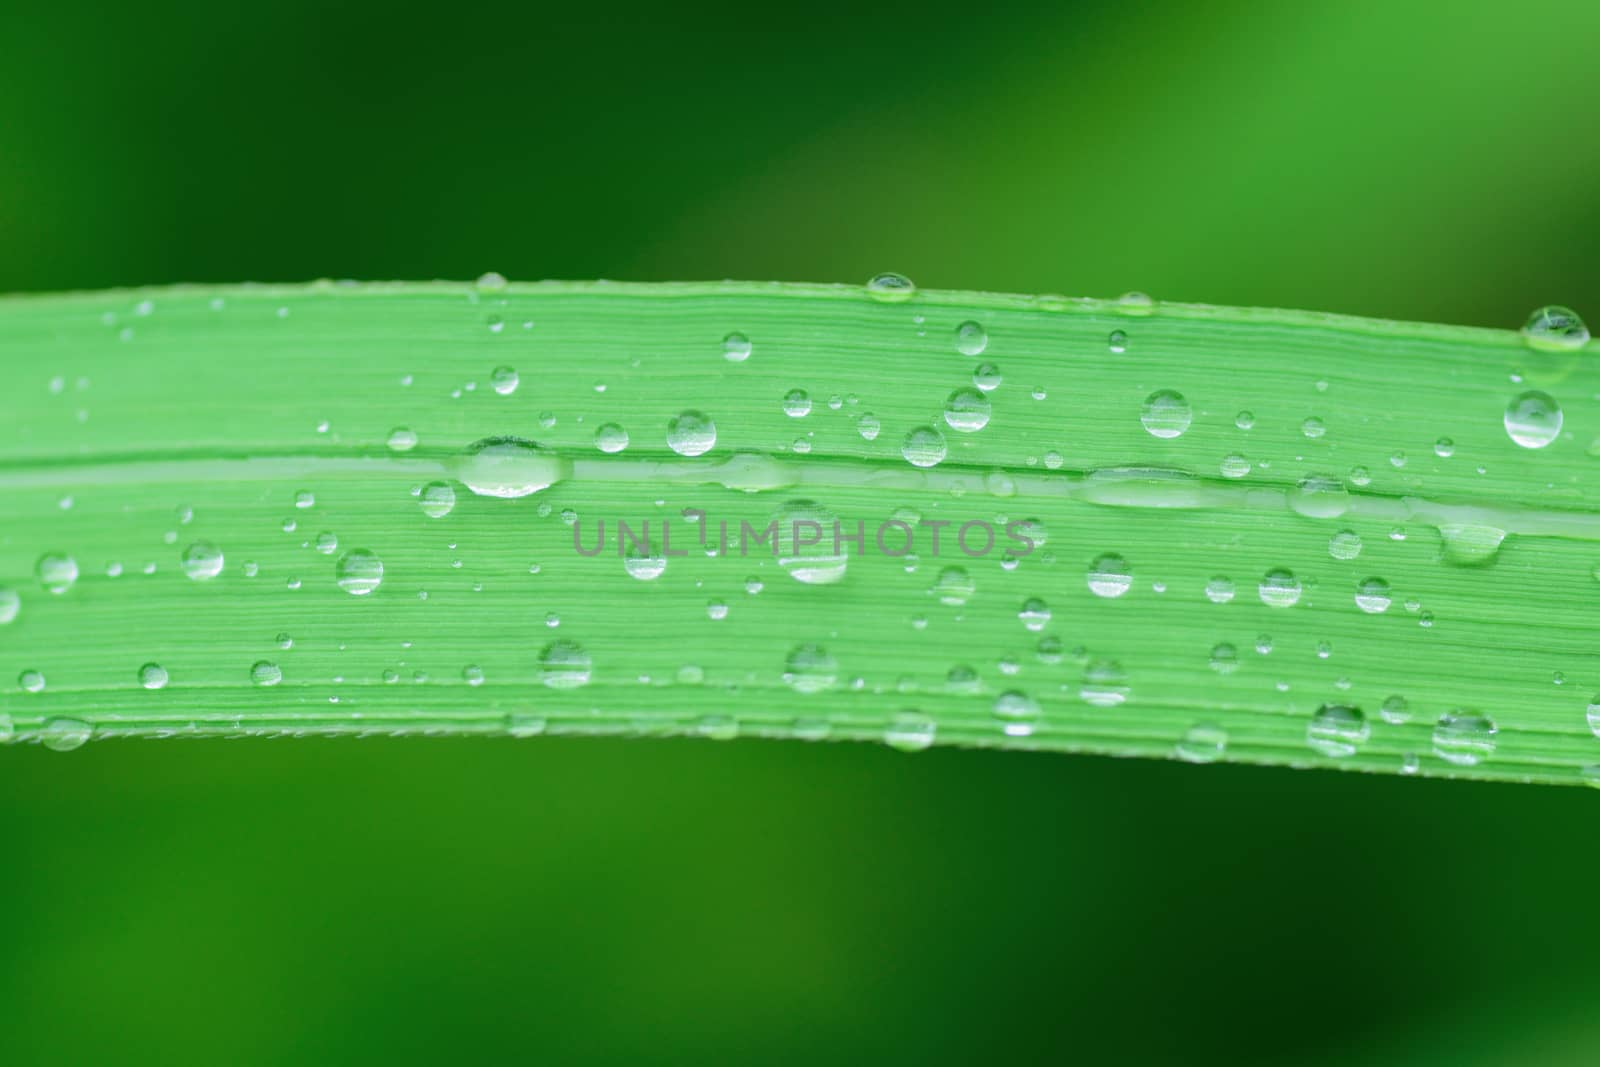 Macro texture of rain water droplets on green grass in vertical frame